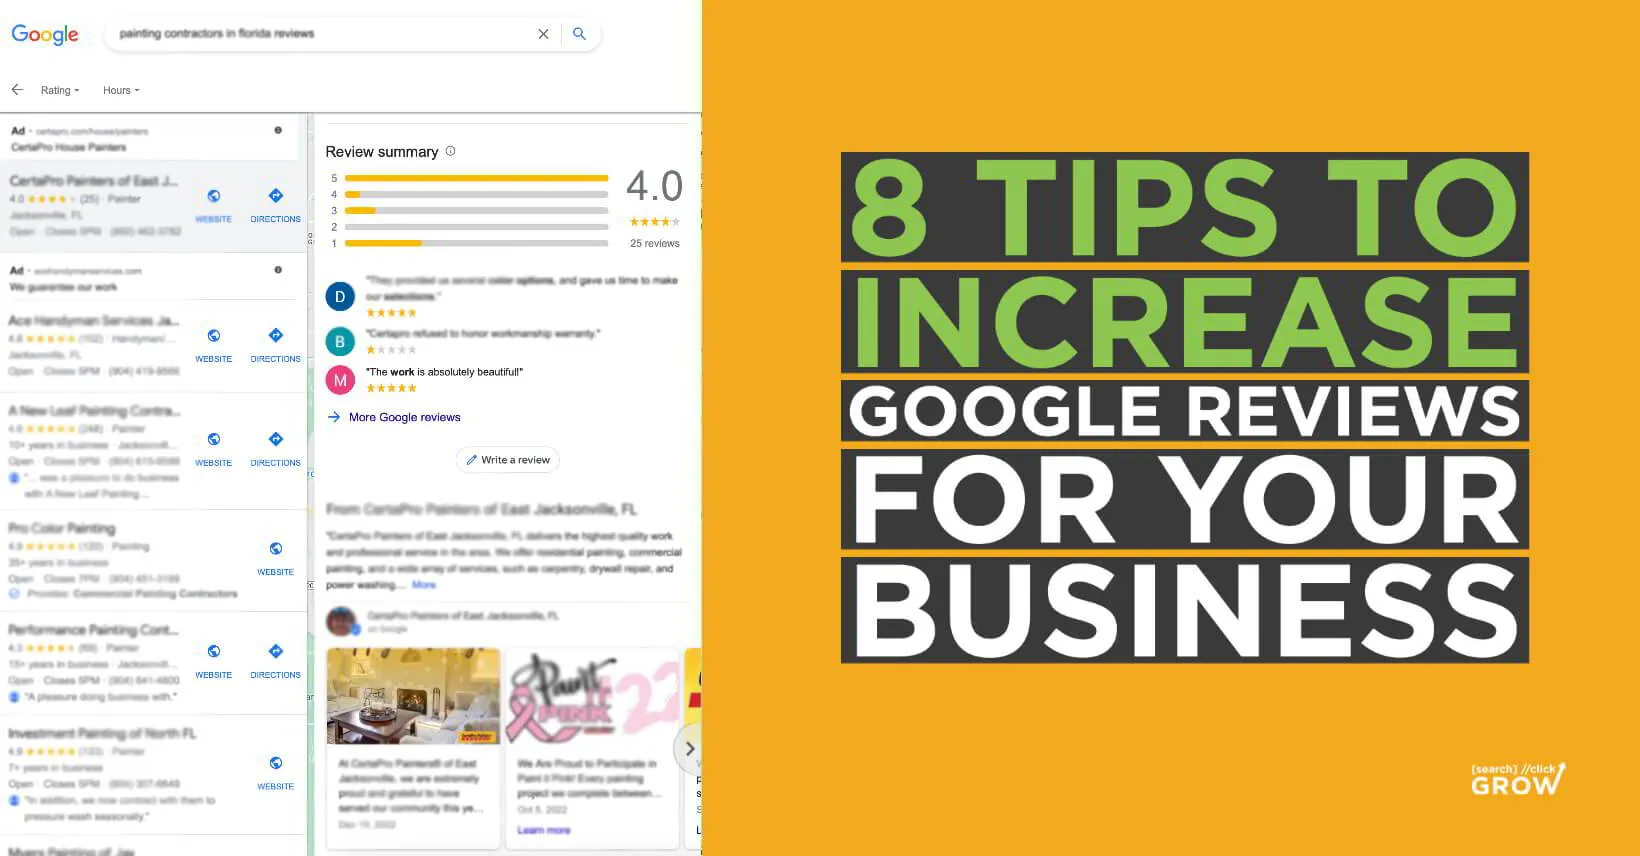 8 Tips On How to Increase Google Reviews for Your Business